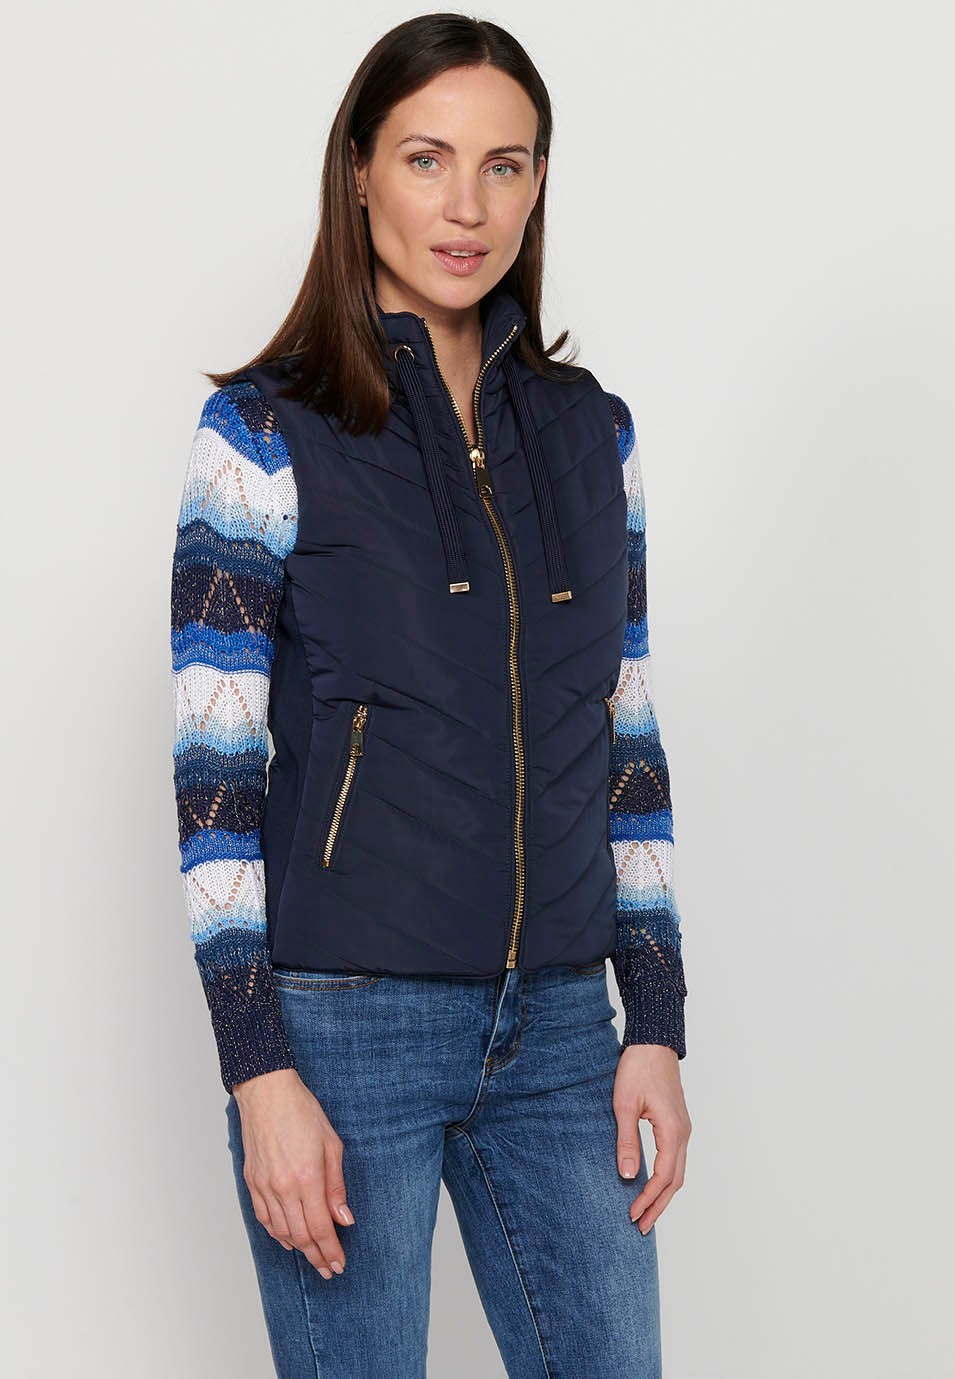 Padded vest with adjustable high neck with drawstring and front zipper closure in Navy for Women